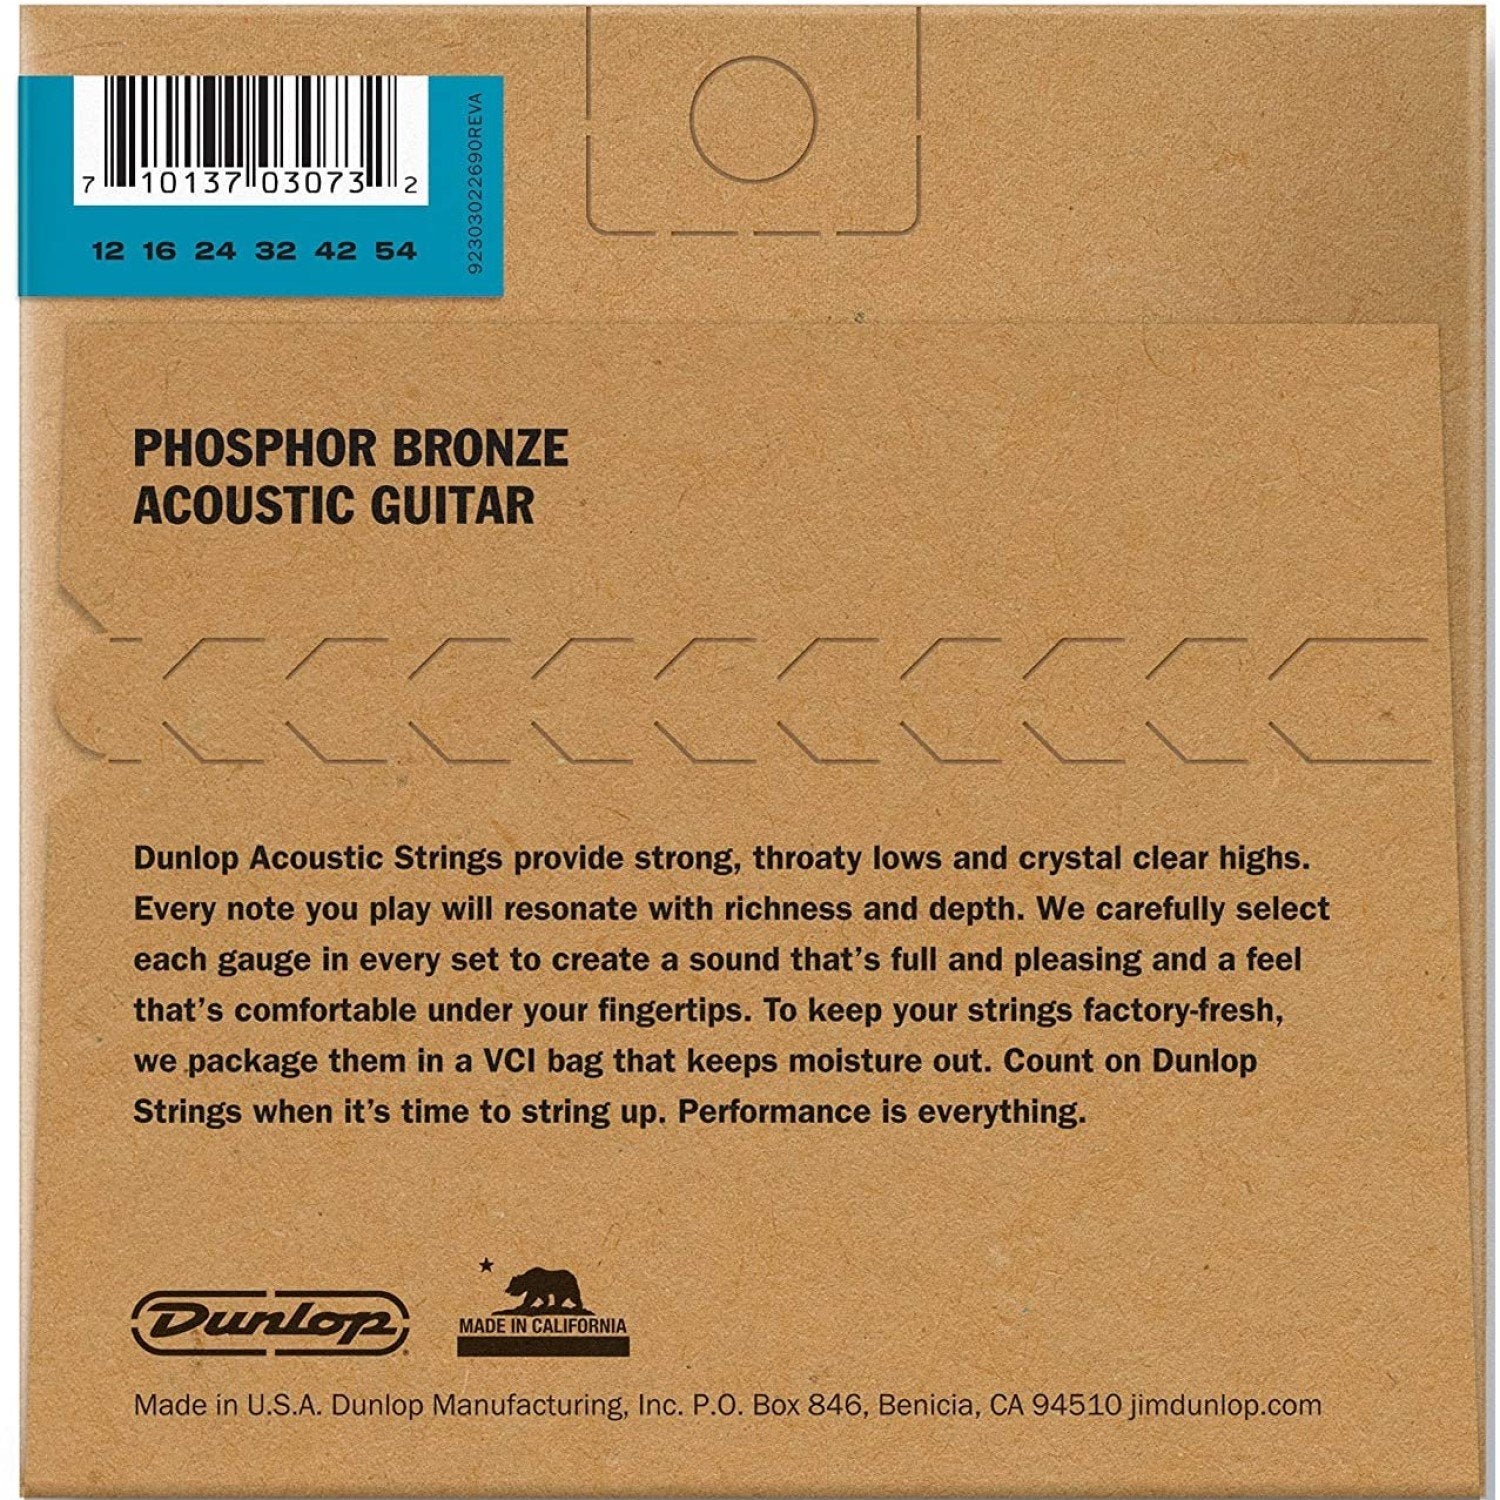 Dunlop Acoustic Trigger Capo And Phosphor Bronze Strings 12 To 54 83CB